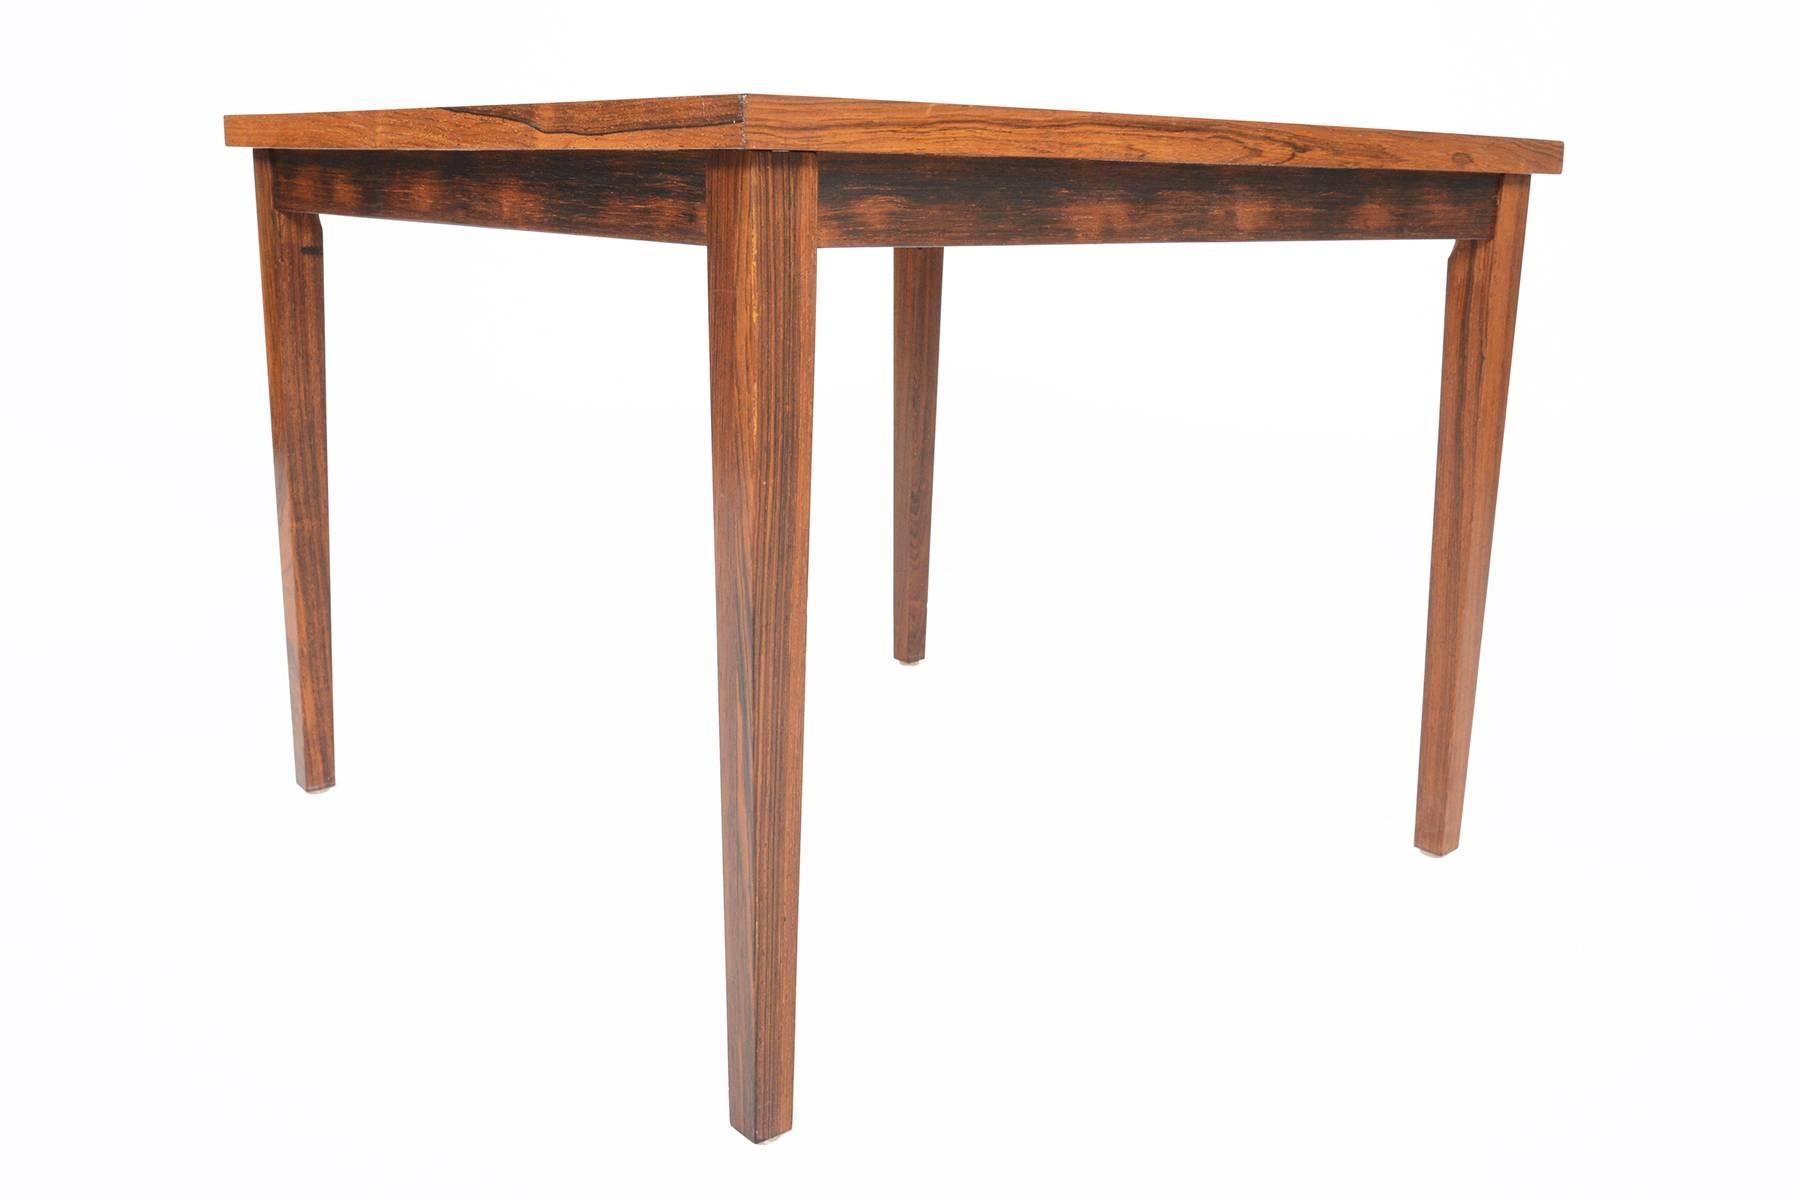 This lovely Danish modern Mid-Century square slatted coffee table features beautiful rosewood grain in a simple yet elegant form. Raised on tapered square legs, this piece will provide elegance and sophistication to any home. In excellent original